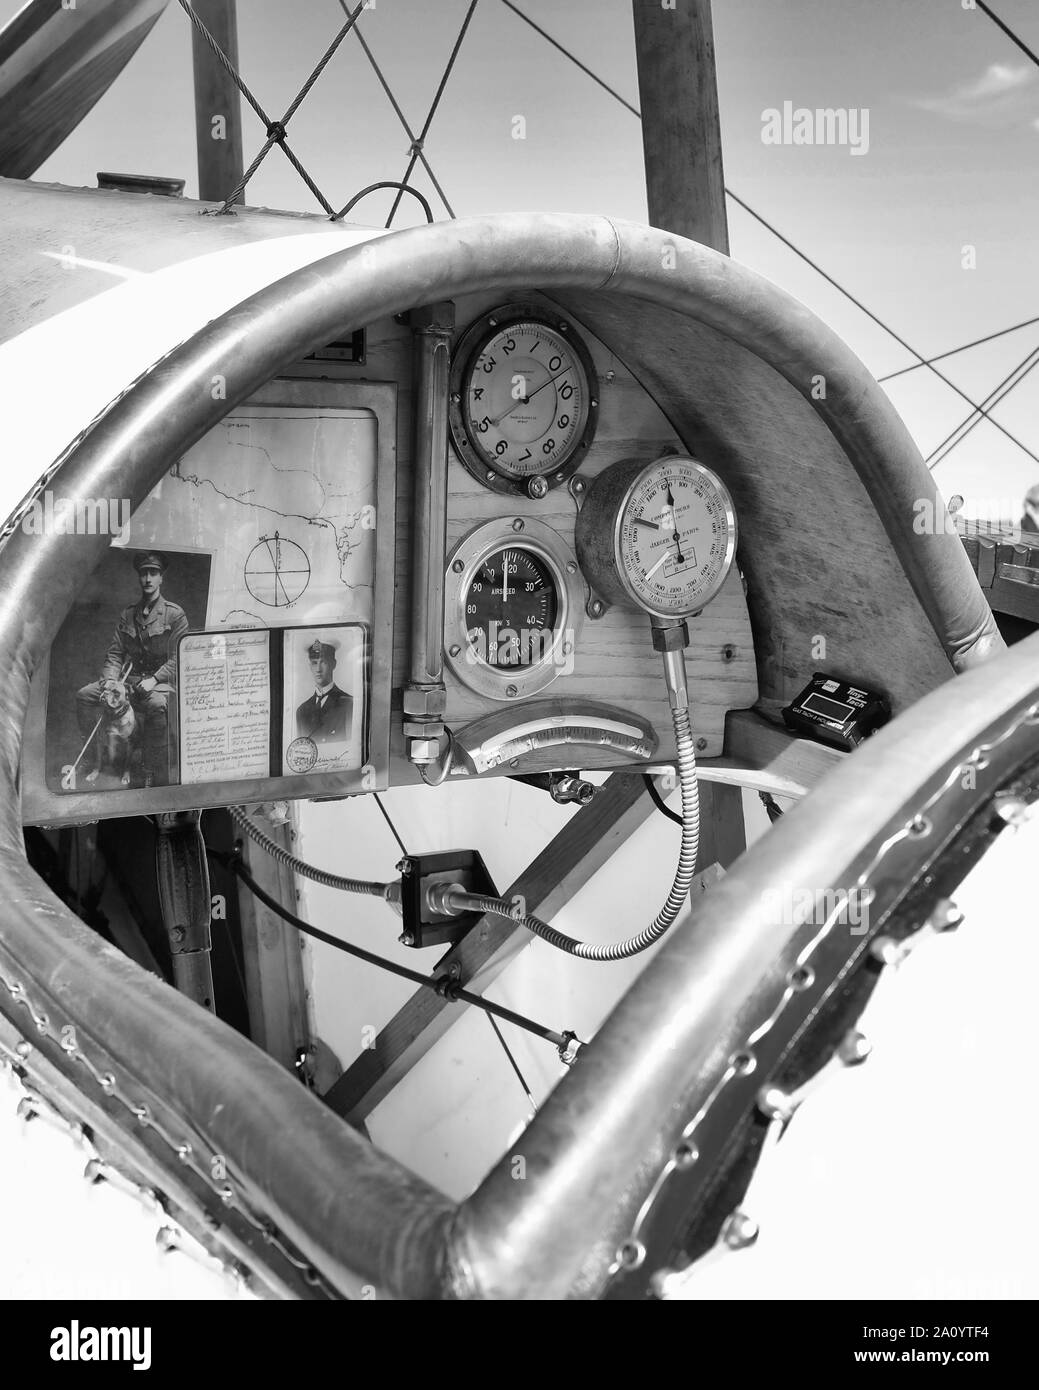 September 2019 - Bi place cockpit detail of an aircraft at the Goodwood revival race meeting Stock Photo